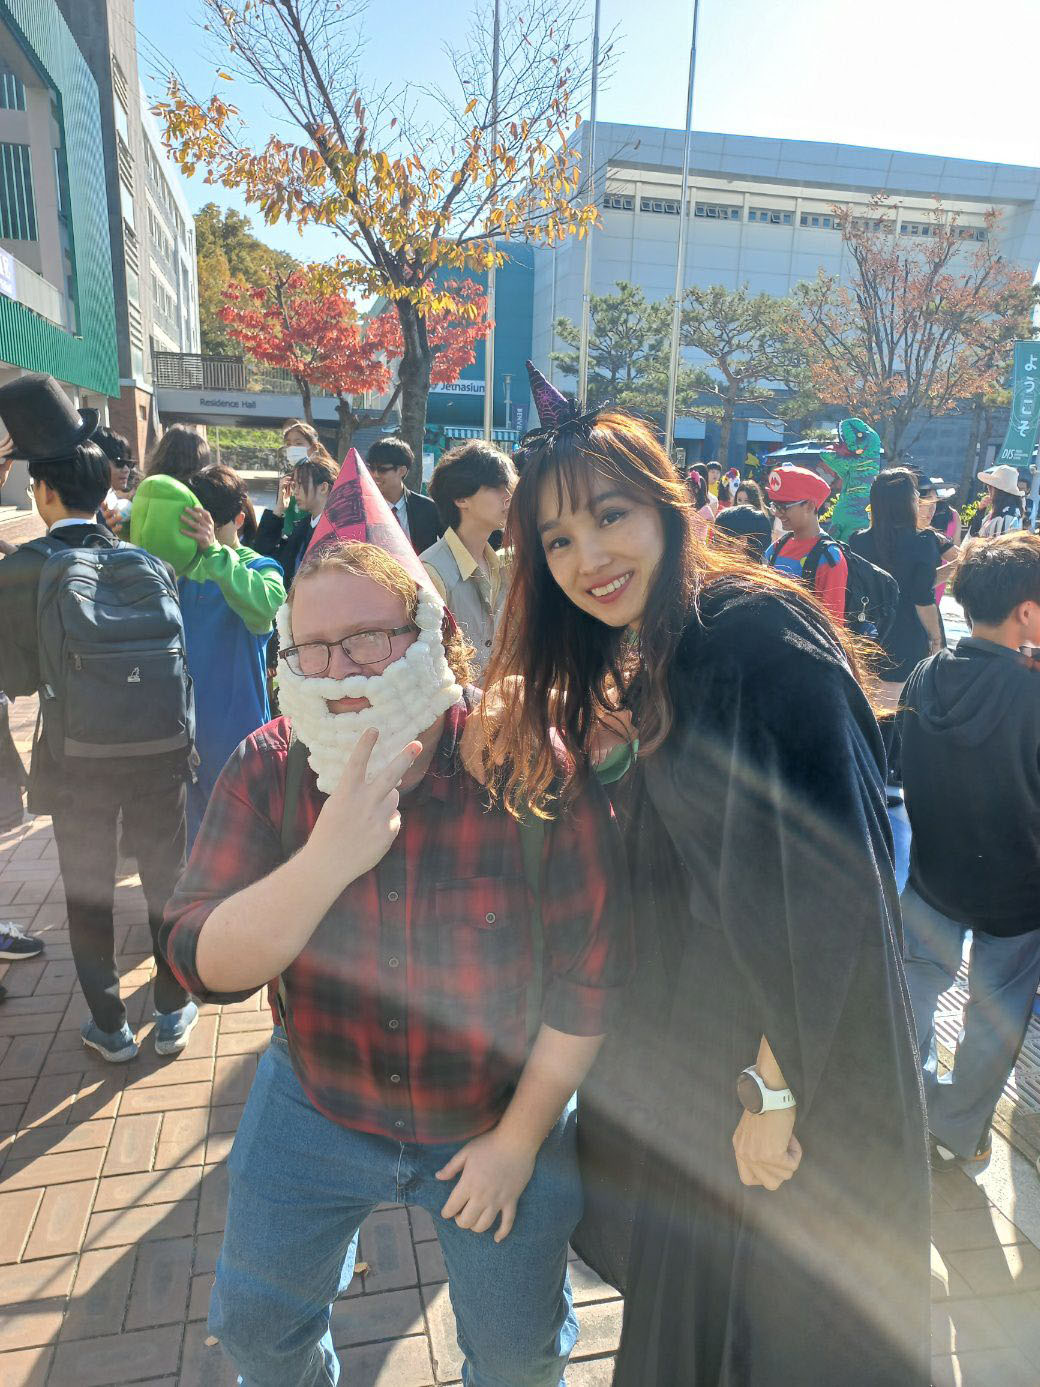 Mr. Mayo dresses up as an elf and Mrs. Kim as a witch. He shows his Halloween spirit at DIS. Photo courtesy of Mr. Mayo. 